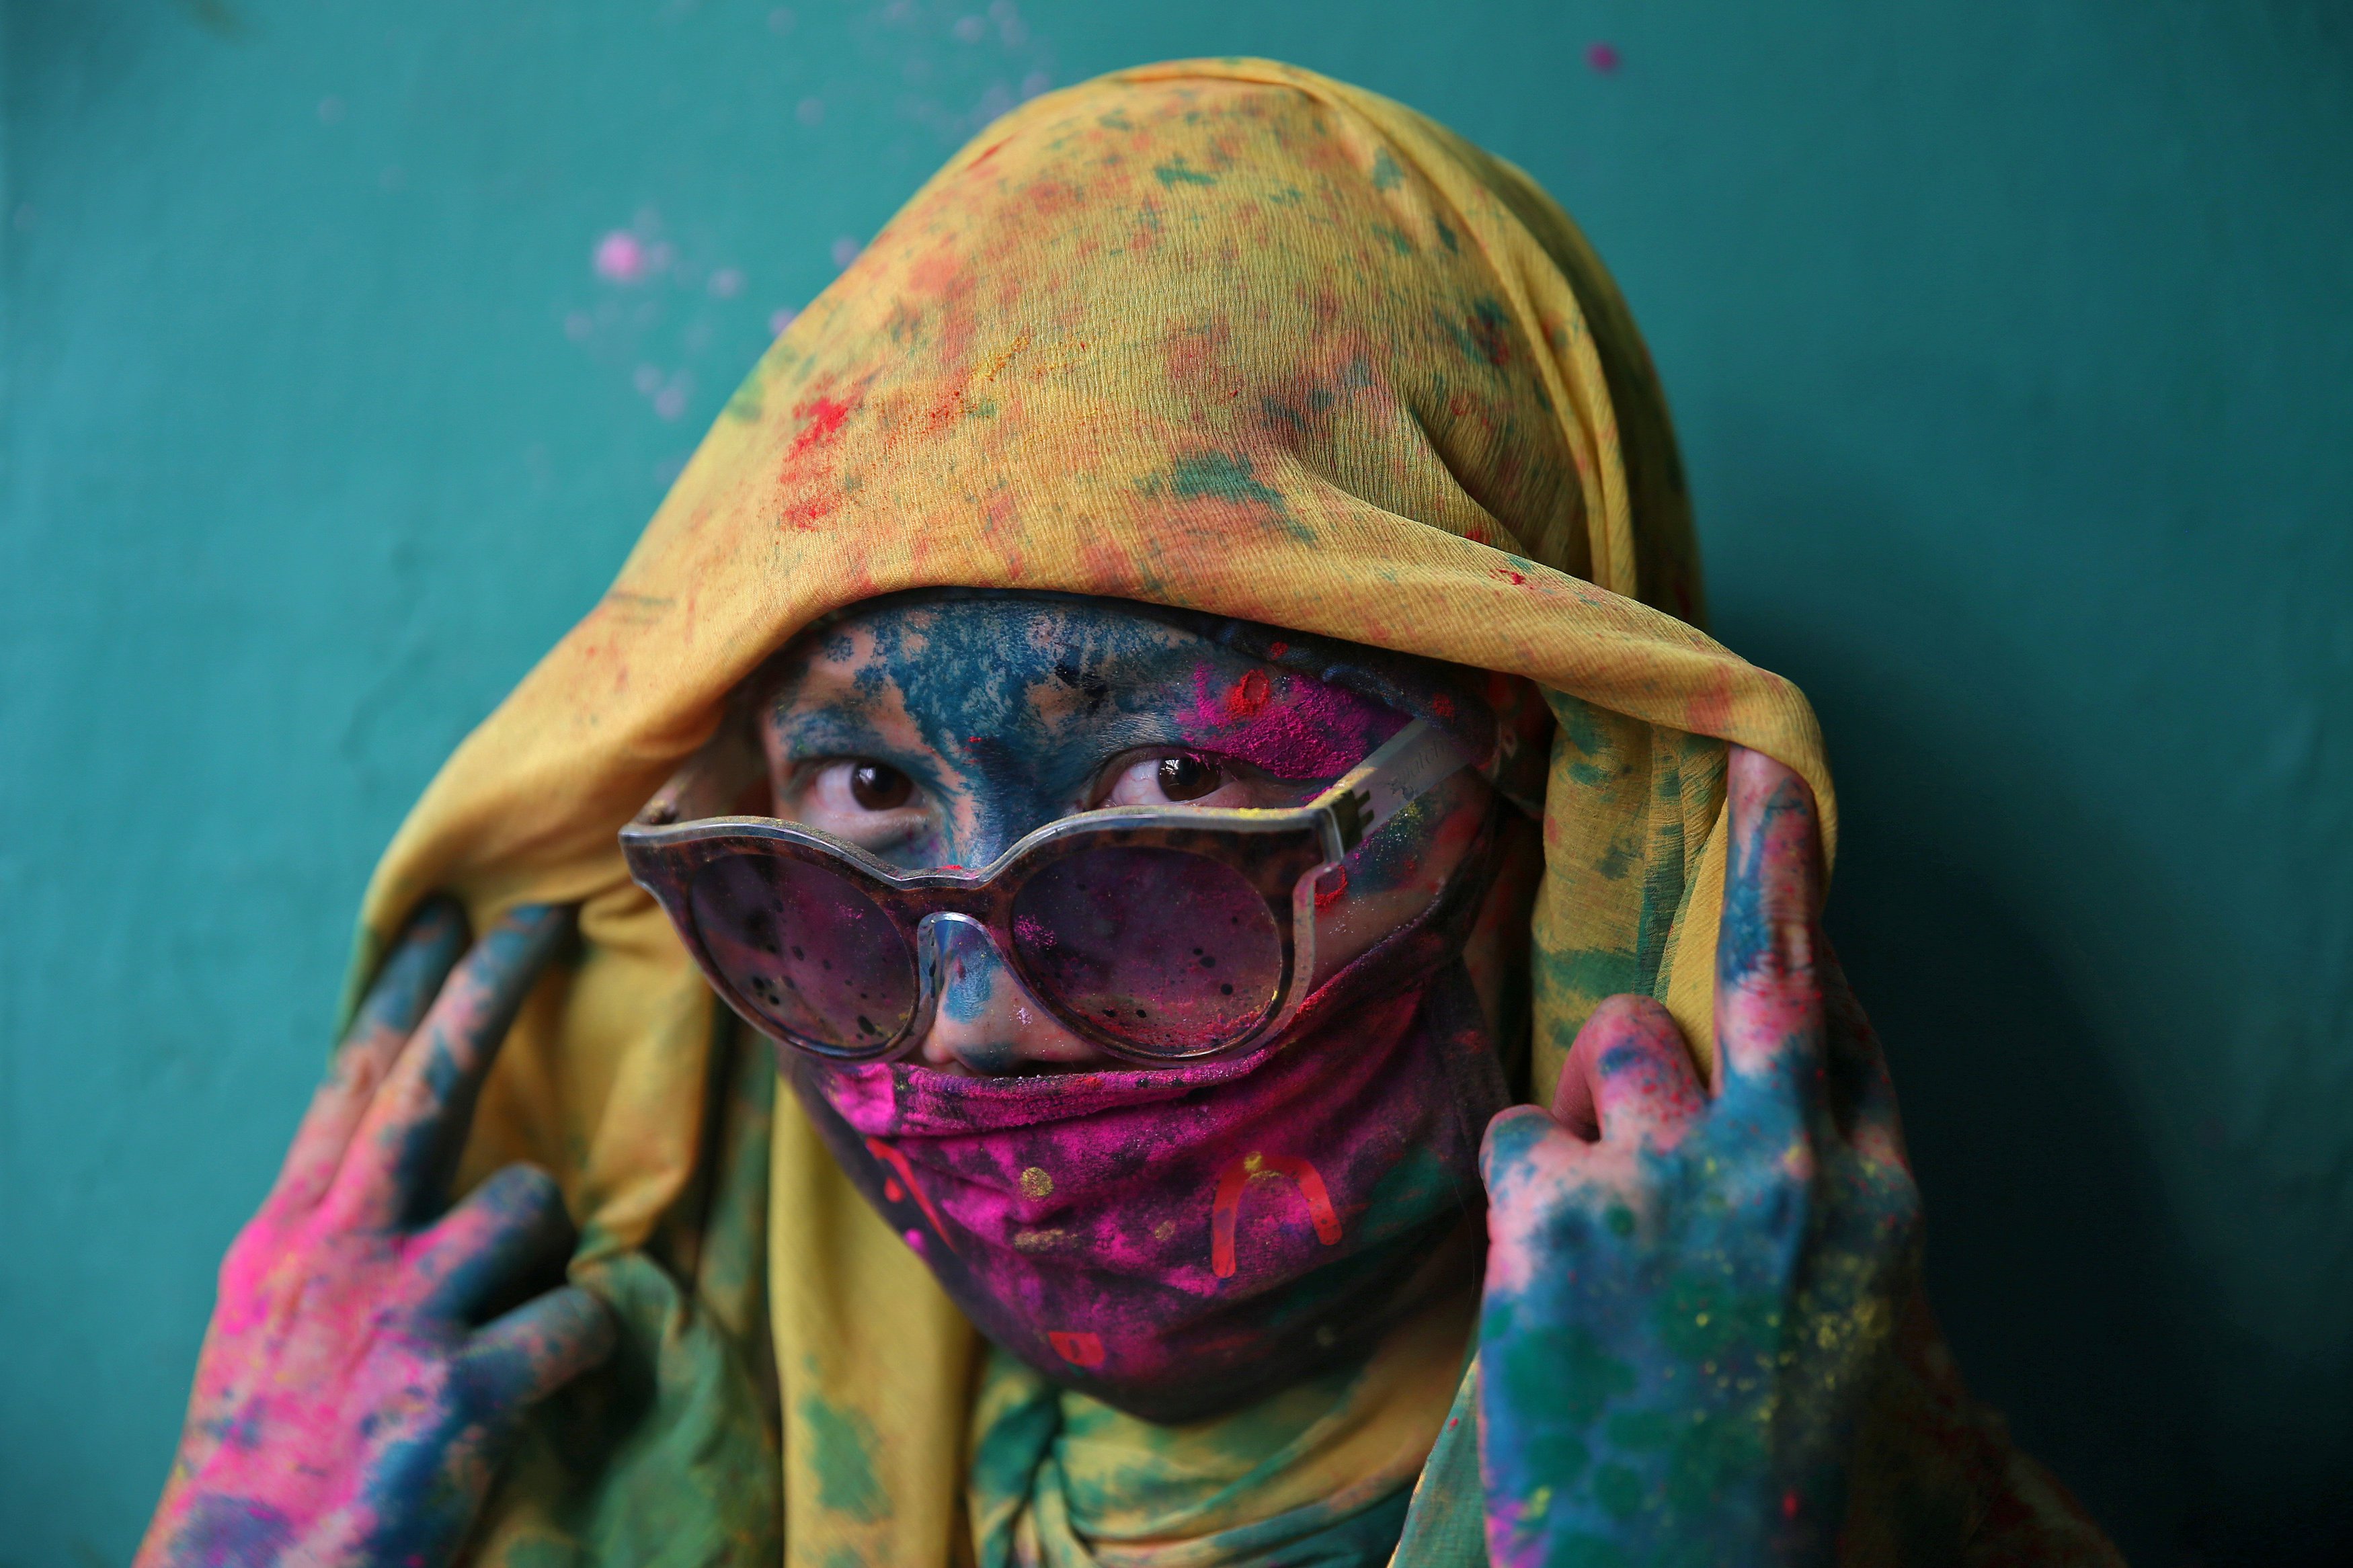 A woman poses for a photograph during Holi celebrations in the town of Barsana in the state of Uttar Pradesh. PHOTO: REUTERS